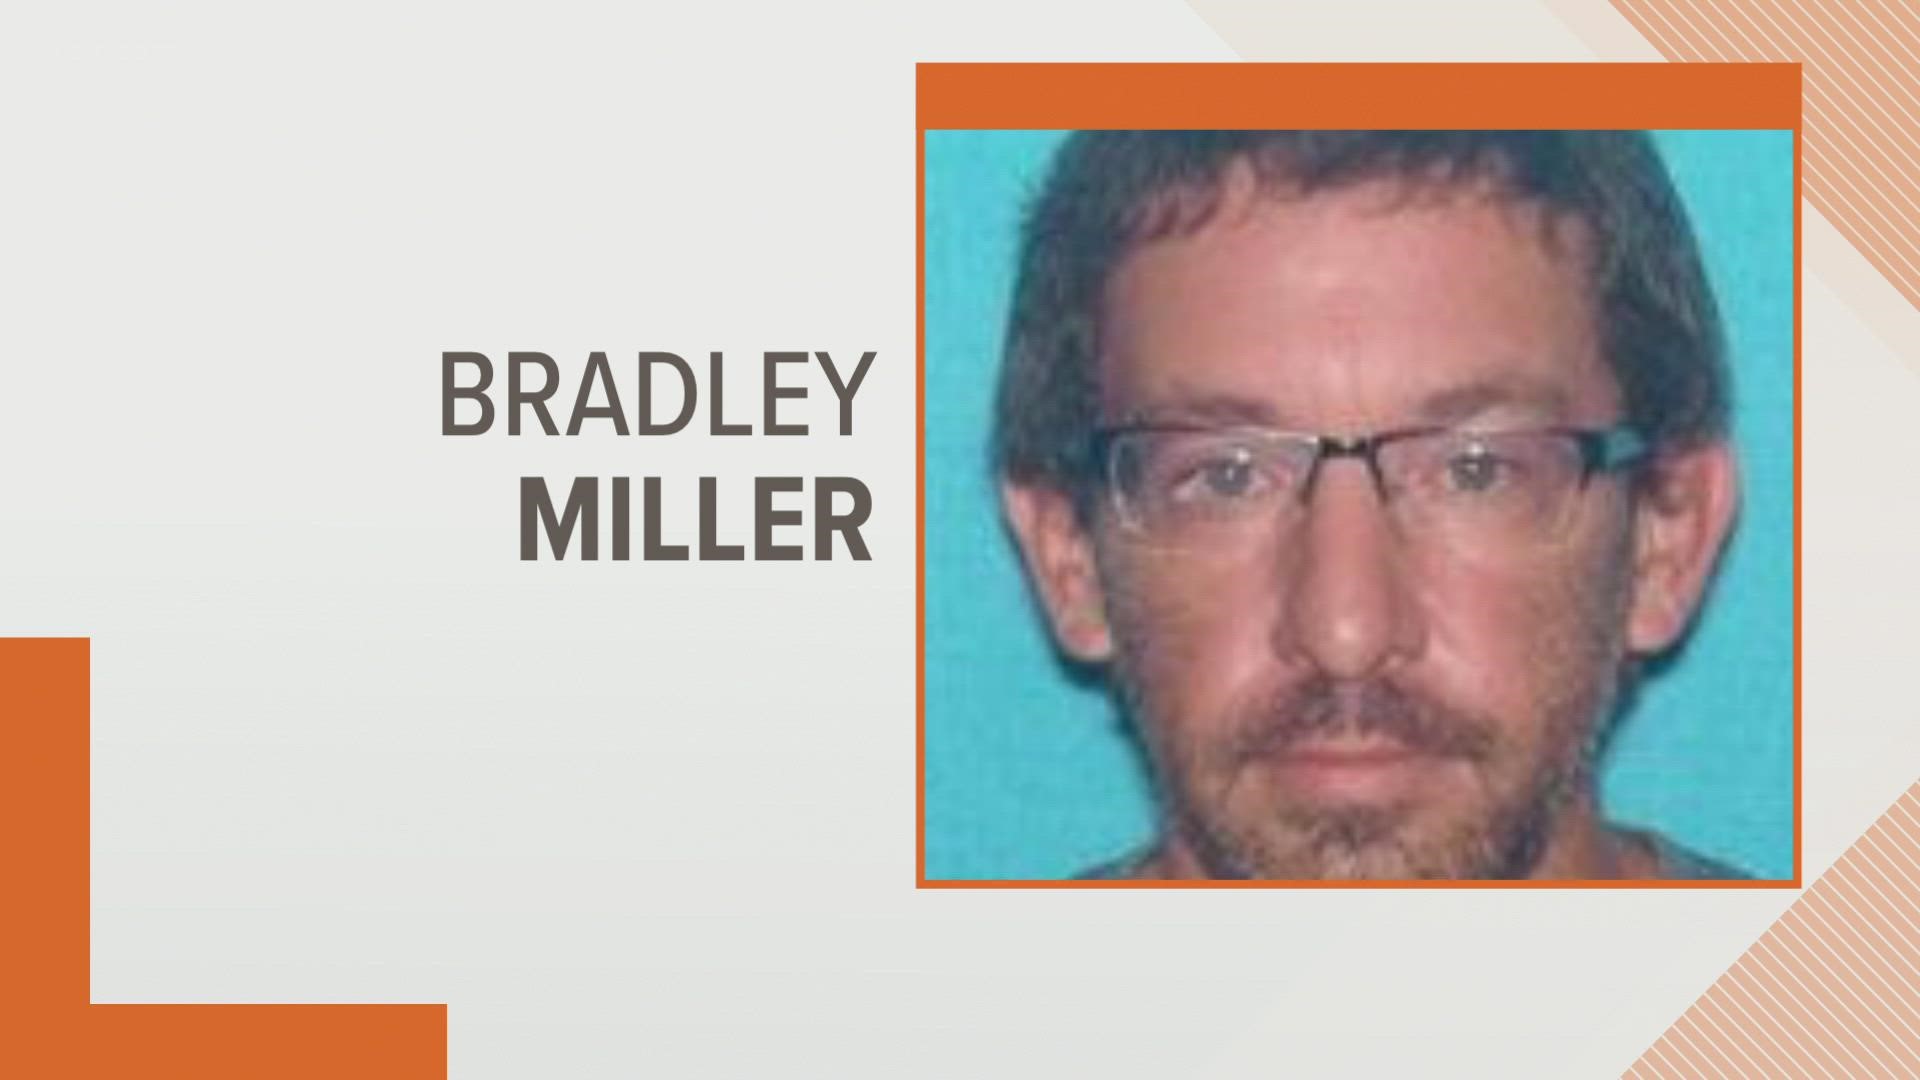 Bradley Miller has been charged with first degree murder, abuse of a corpse and tampering with evidence.